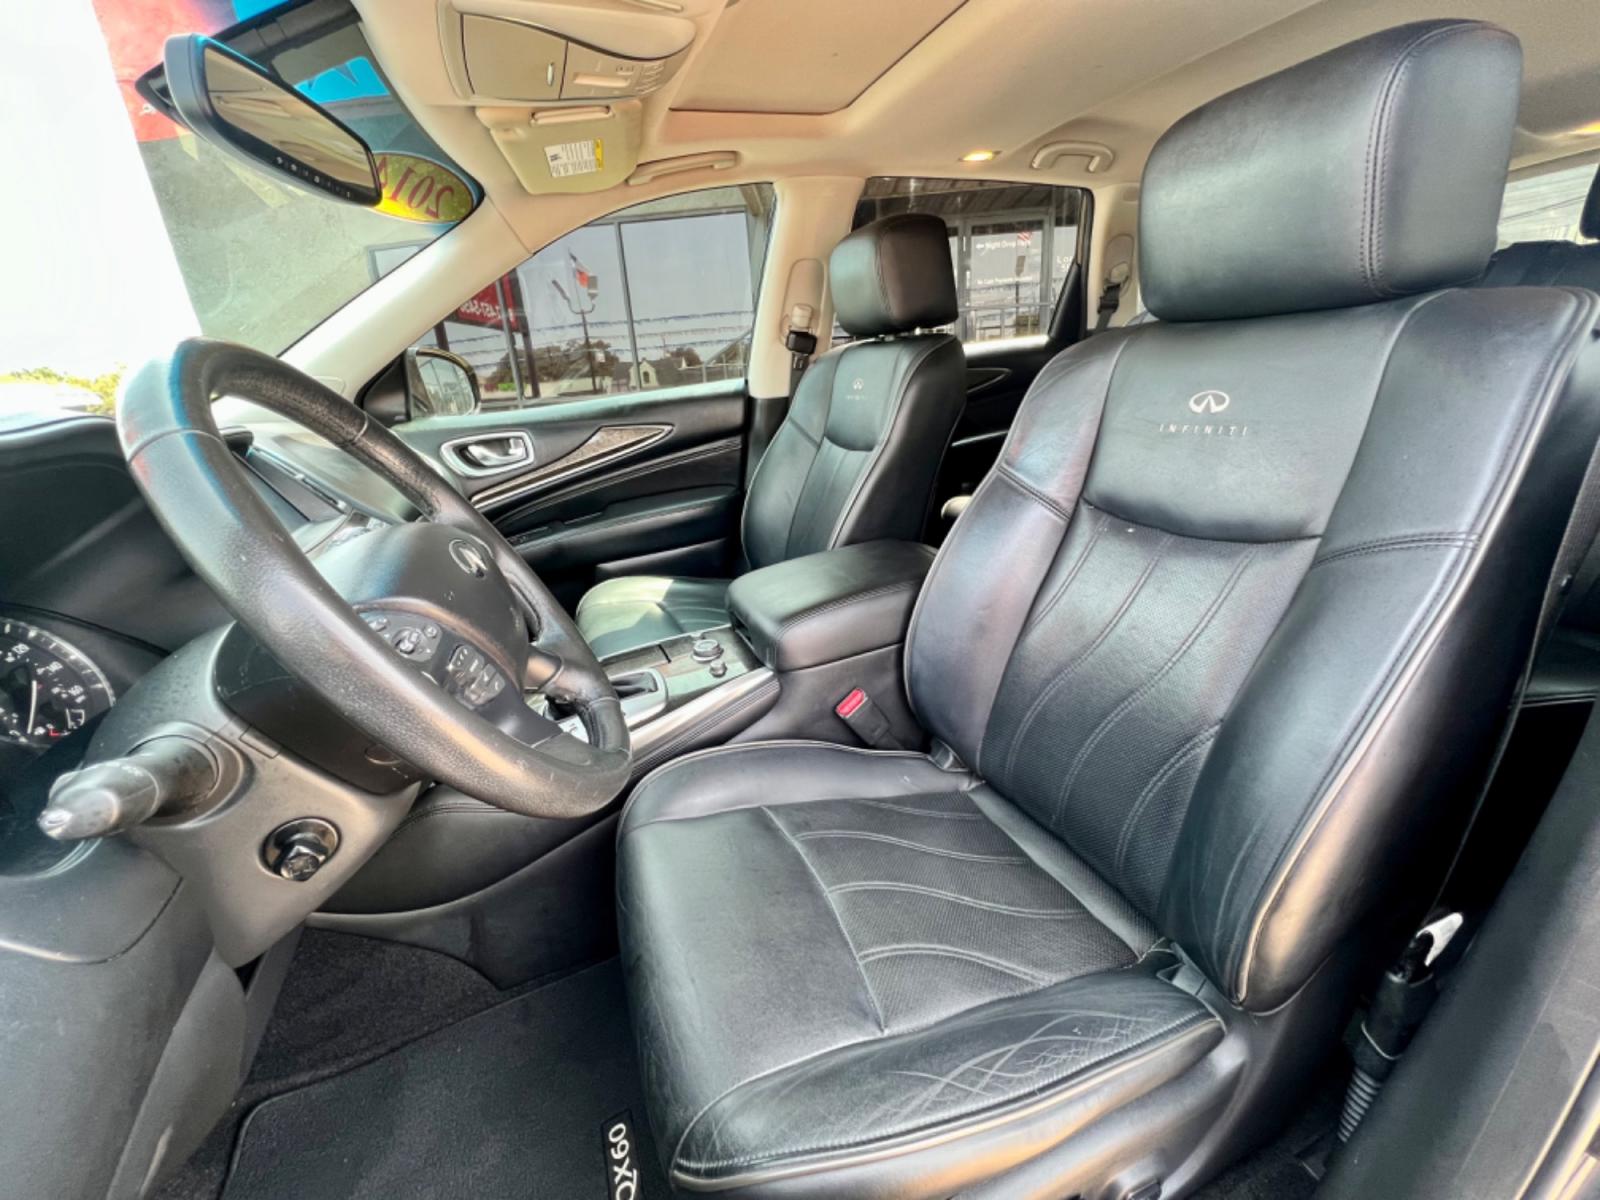 2014 GRAY INFINITI QX60 (5N1AL0MN1EC) , located at 5900 E. Lancaster Ave., Fort Worth, TX, 76112, (817) 457-5456, 0.000000, 0.000000 - This is a 2014 INFINITI QX60 4 DOOR SUV that is in excellent condition. There are no dents or scratches. The interior is clean with no rips or tears or stains. All power windows, door locks and seats. Ice cold AC for those hot Texas summer days. It is equipped with a CD player, AM/FM radio, AUX port - Photo #10